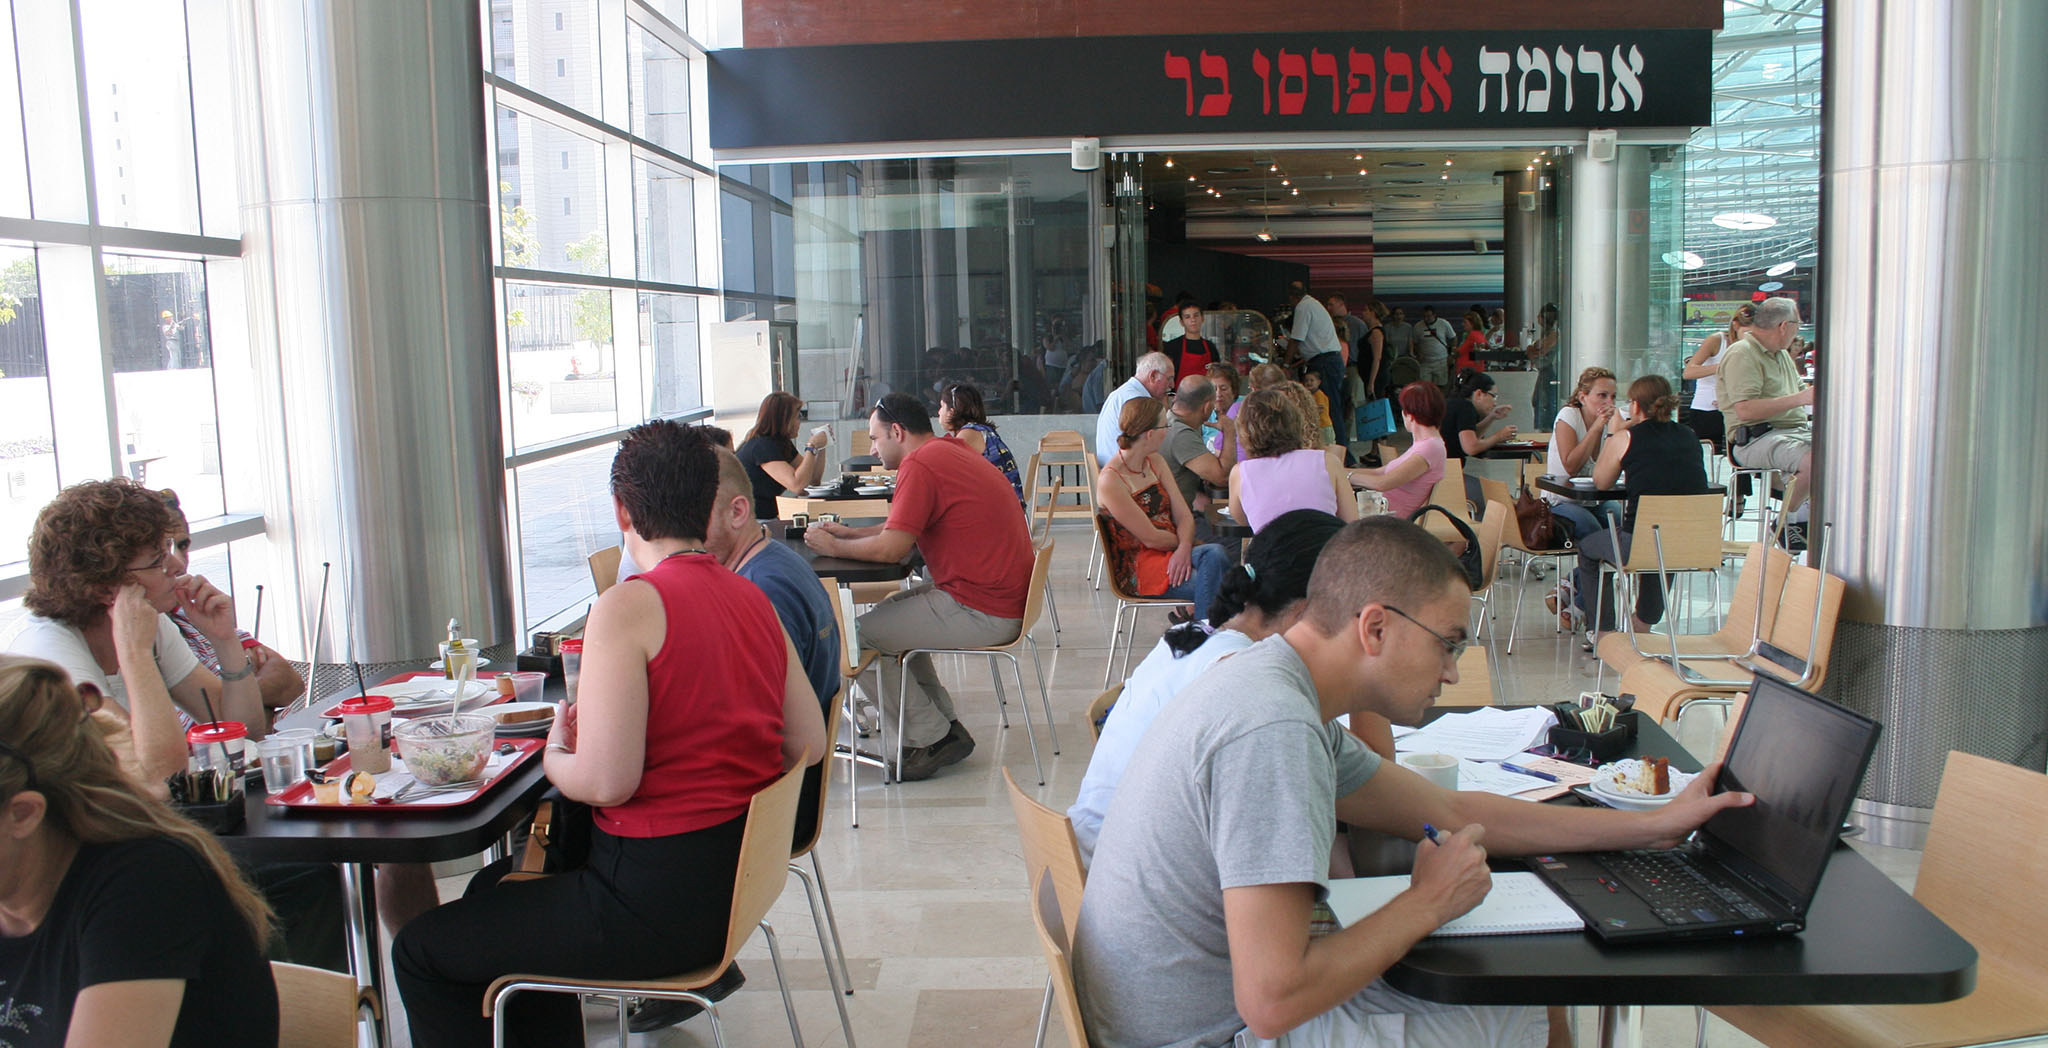 Givatayim Mall branch seating area